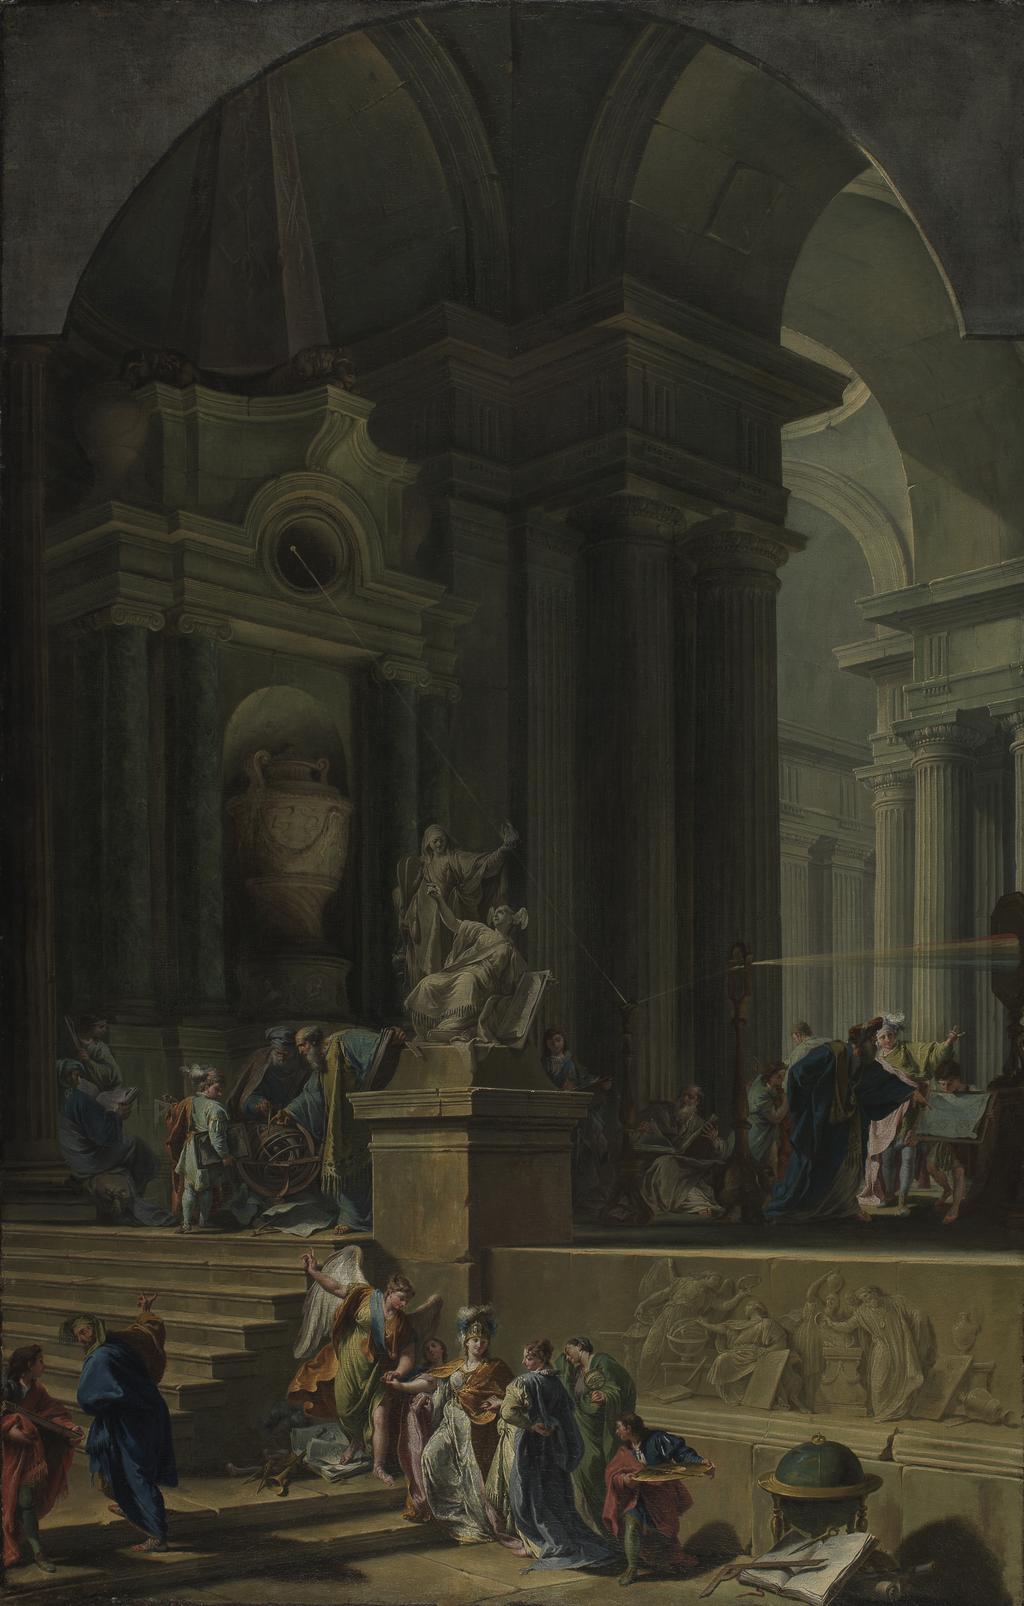 An image of An allegorical monument to Sir Isaac Newton. Pittoni, Giovanni Battista, the younger (1687-1767), Valeriani, Domenico (Italian, op.1700-m.a.1771), Valeriani, Giuseppe (Italian, op.1742-m.1761). Oil on canvas, height (painted area) 220 cm, width (painted area) 139 cm, 1727 to 1729.